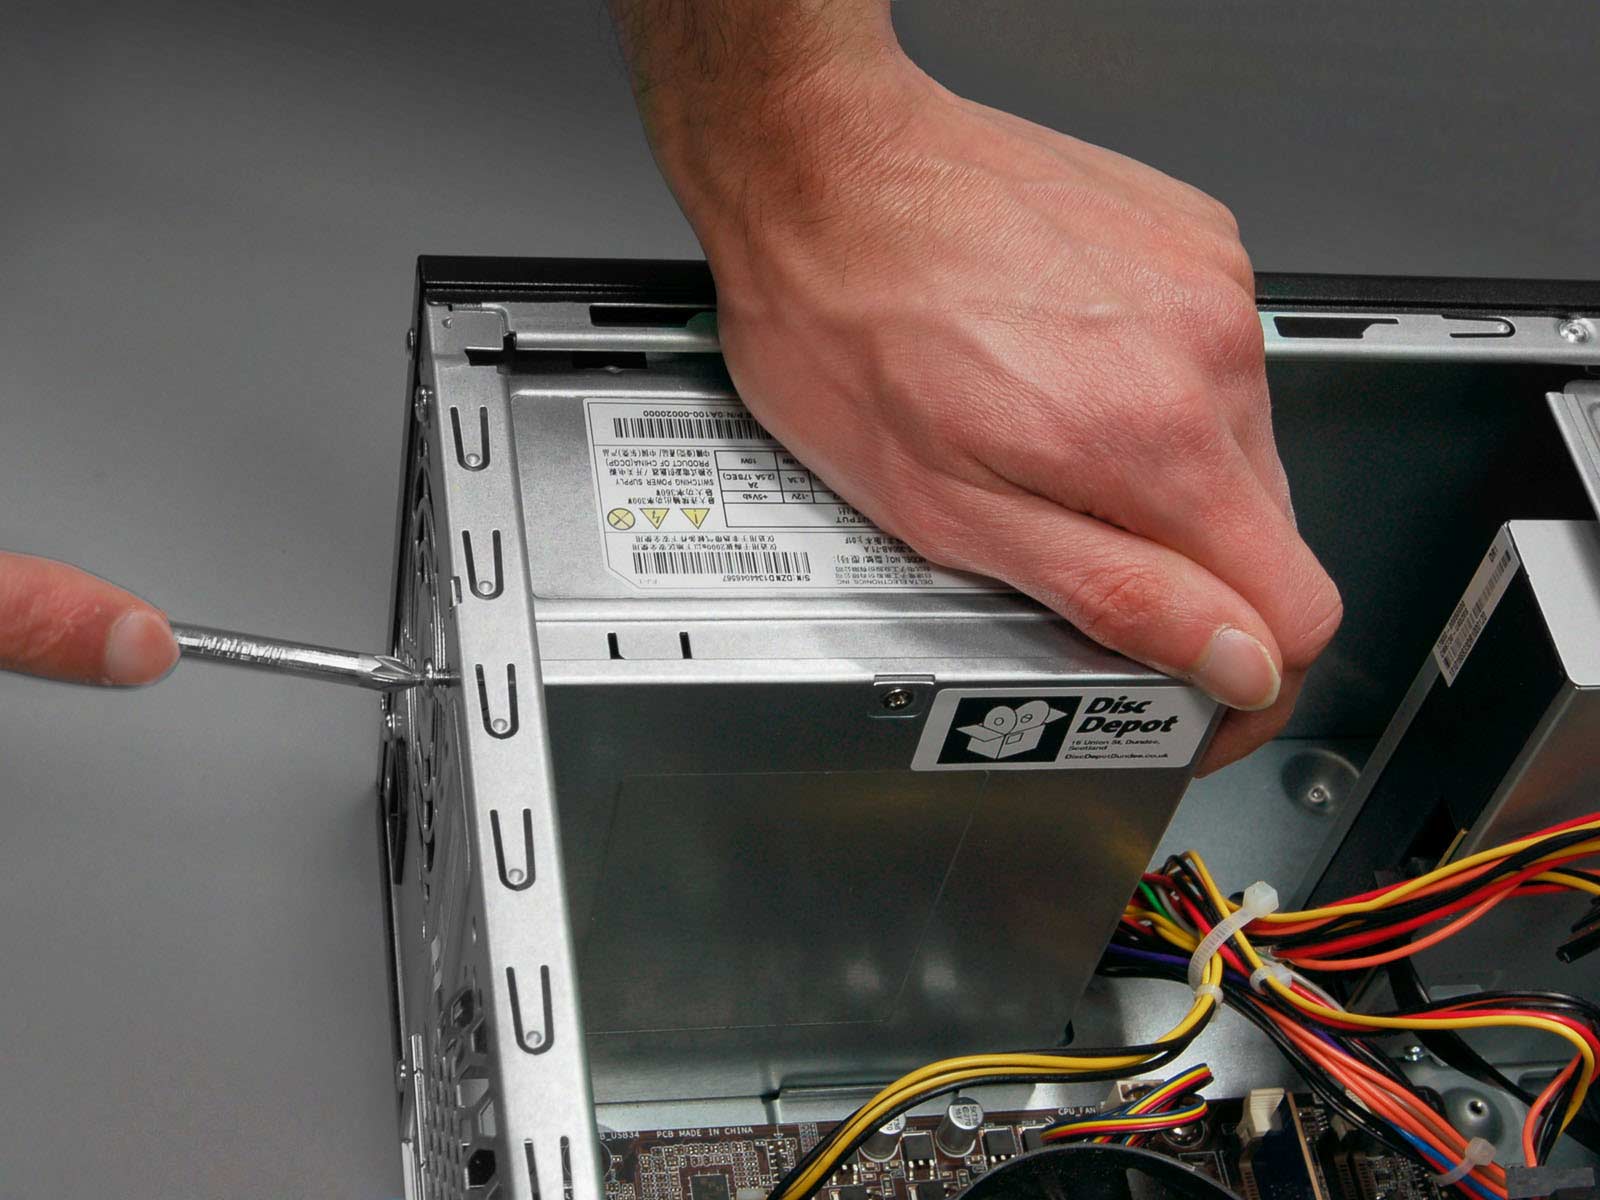 How To Install PSU